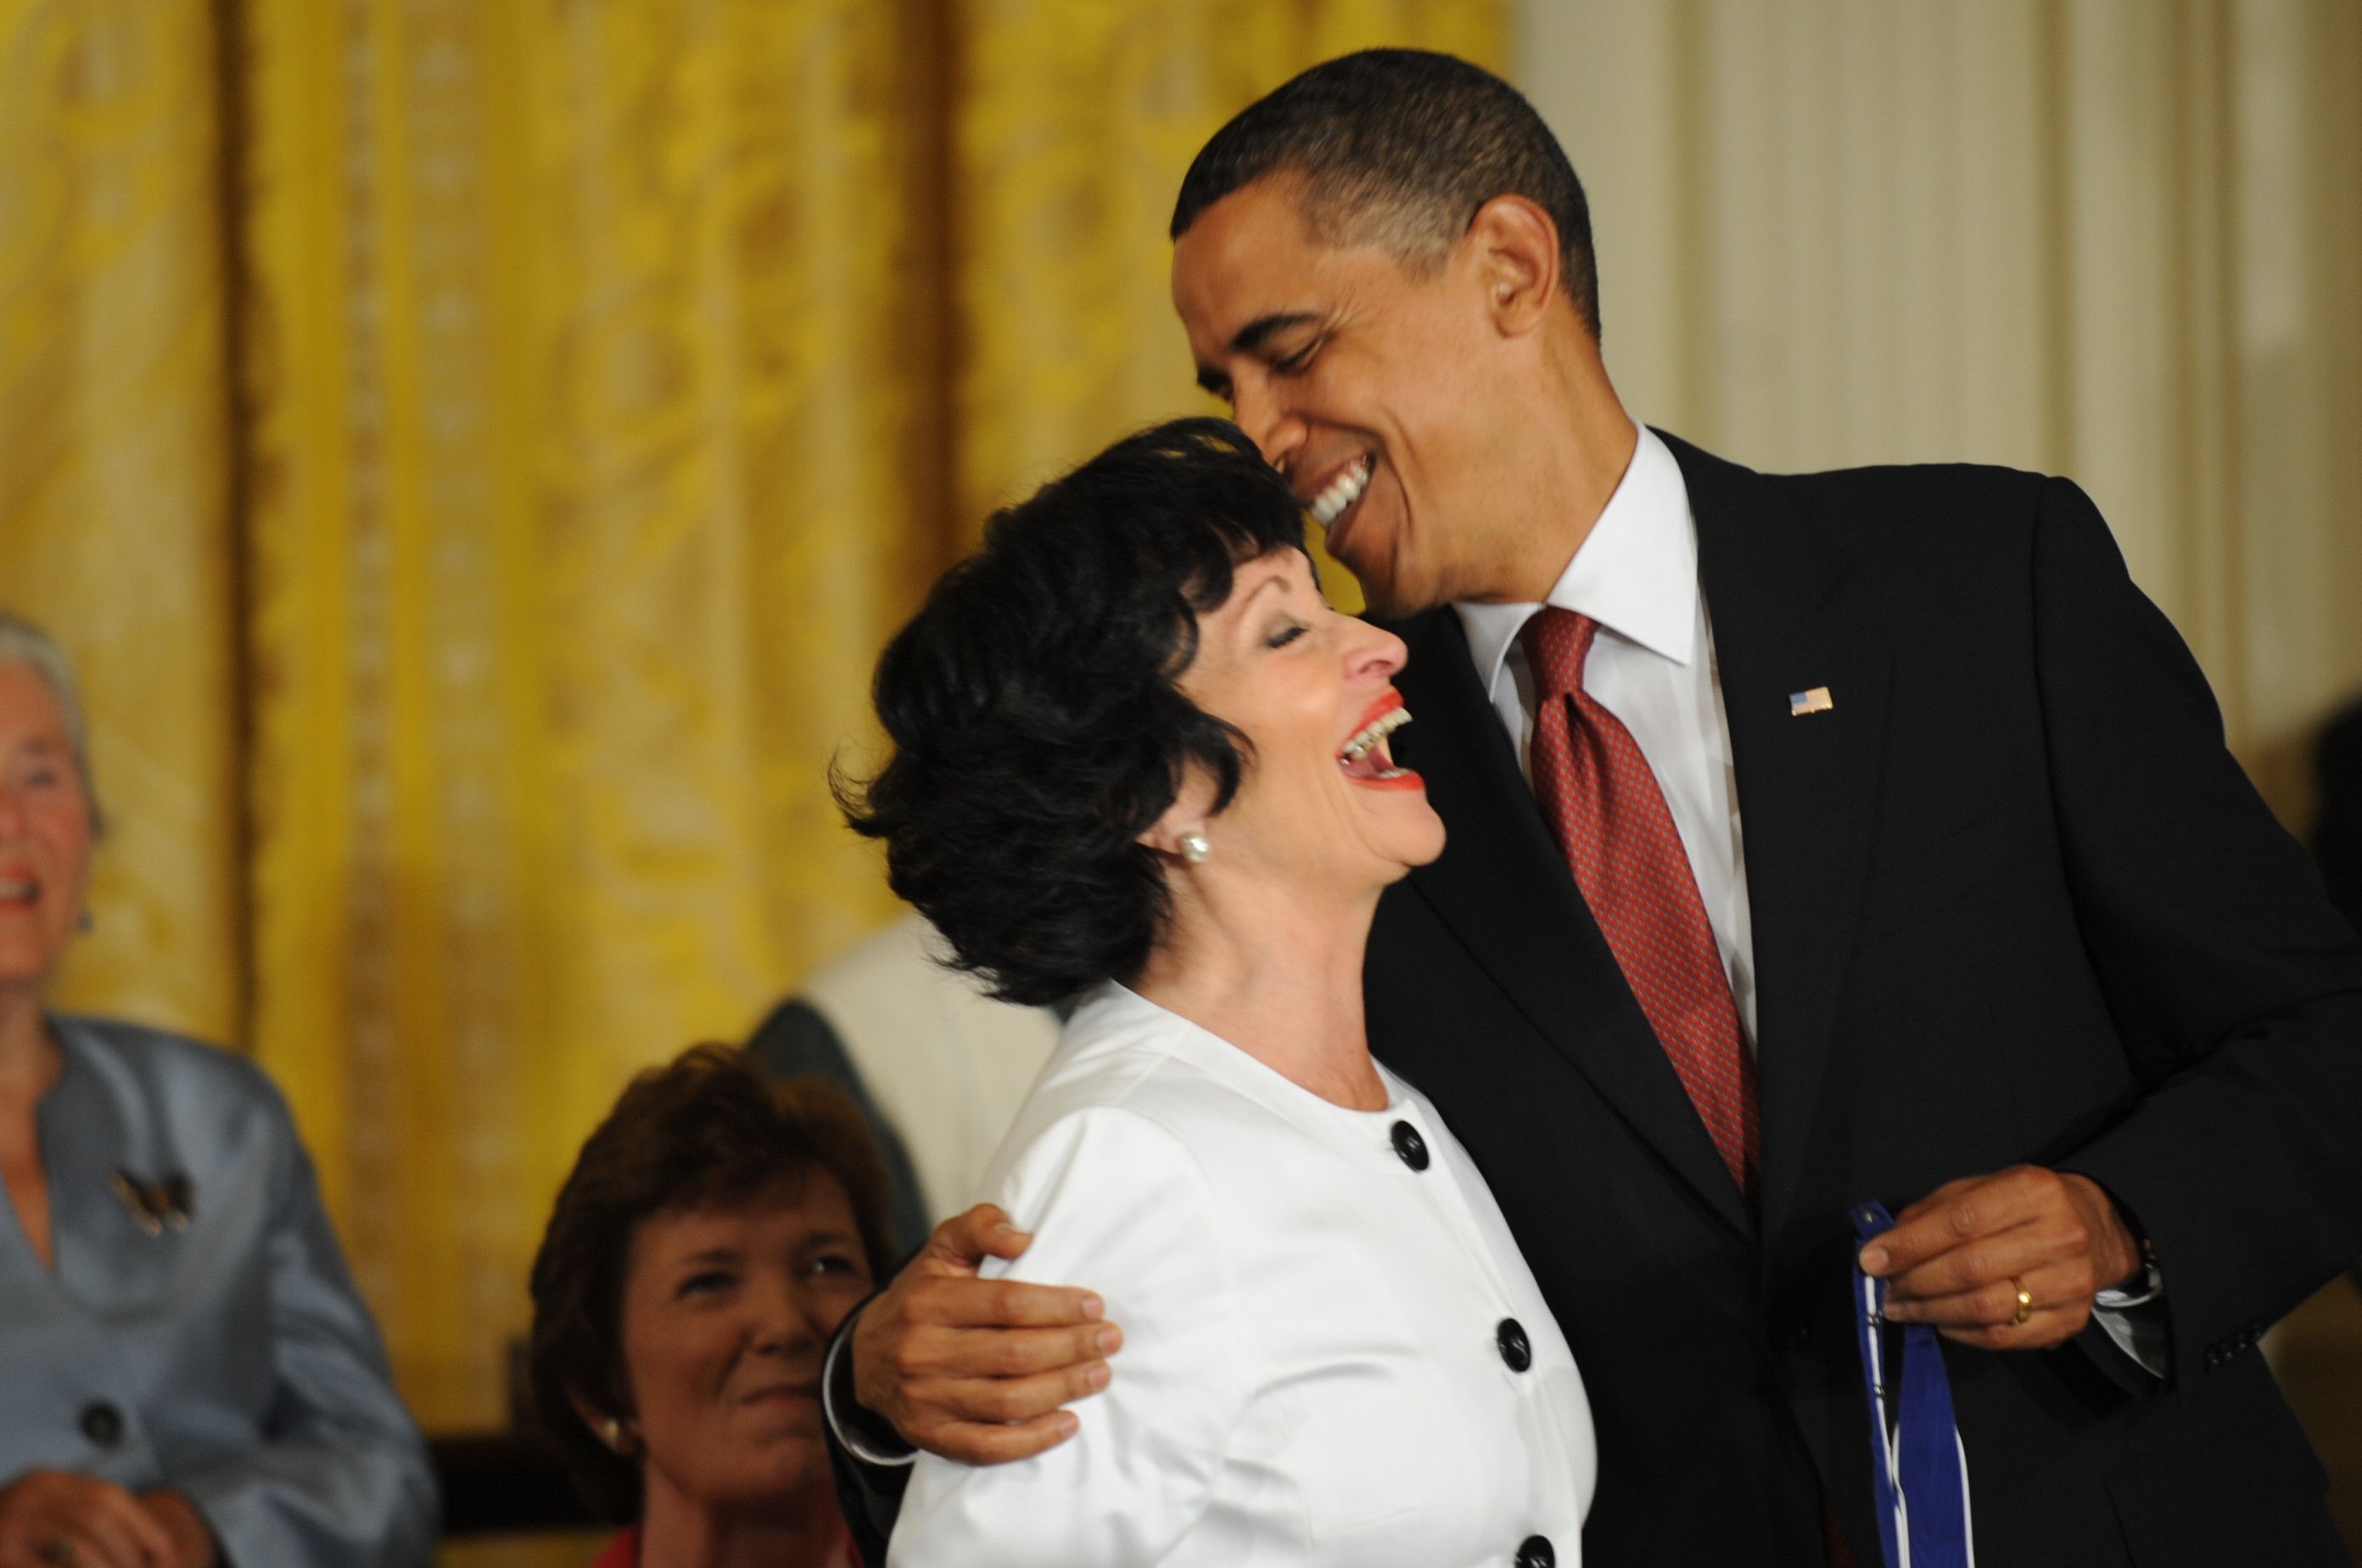 Chita Rivero laughs while President Barack Obama whispers in her ear.